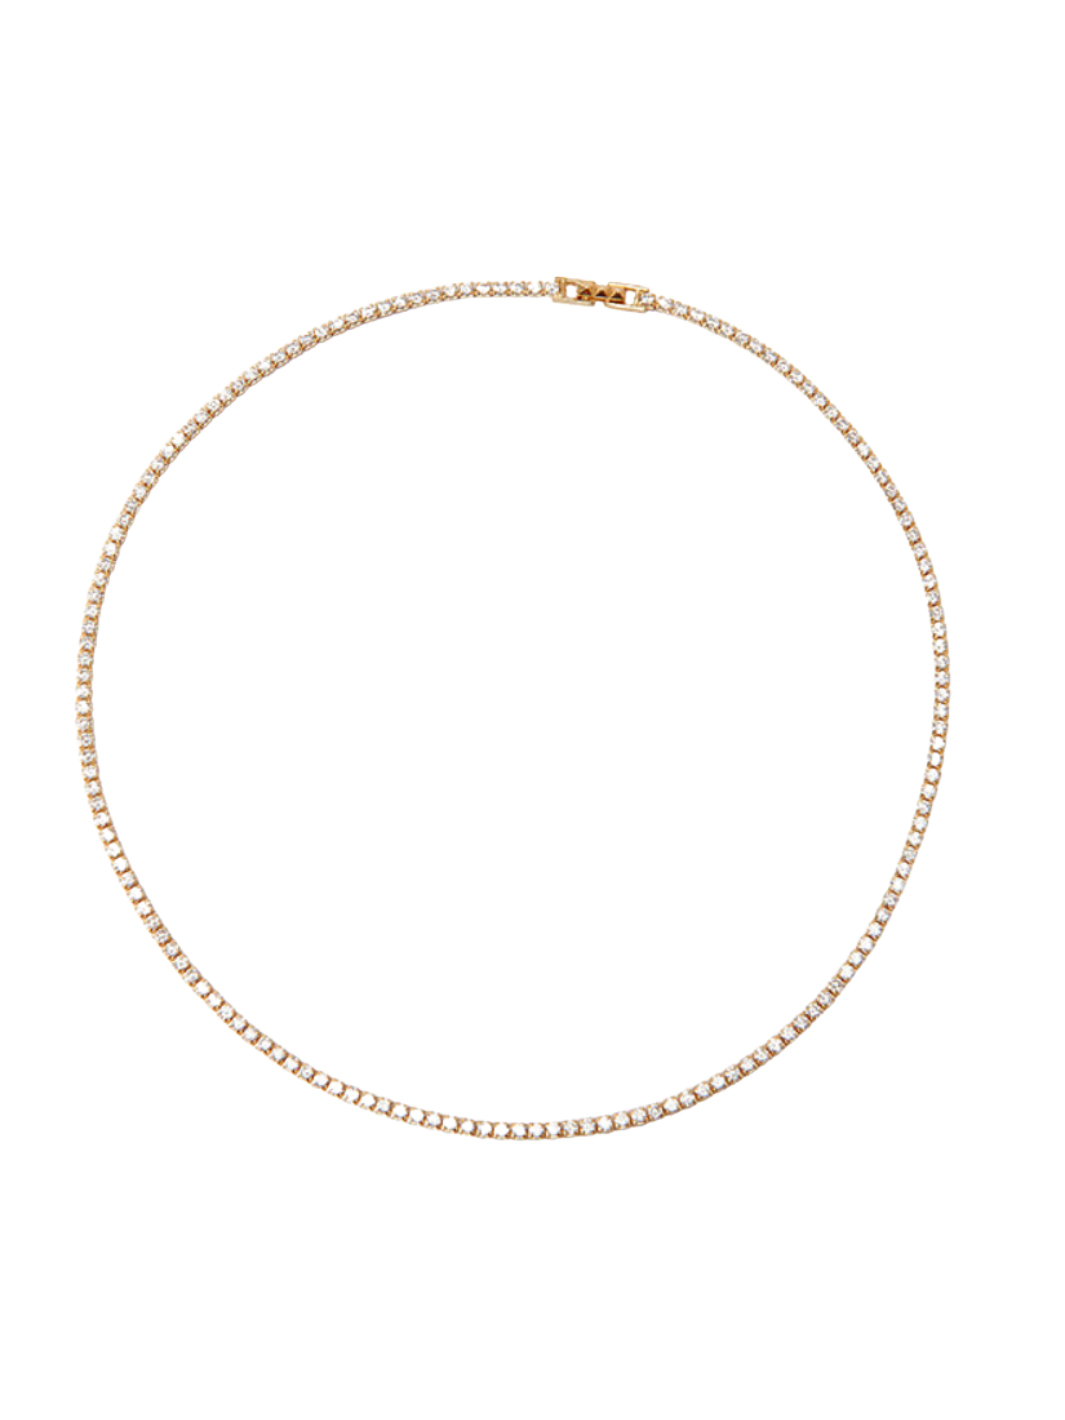 TISH TENNIS NECKLACE IN GOLD - Romi Boutique